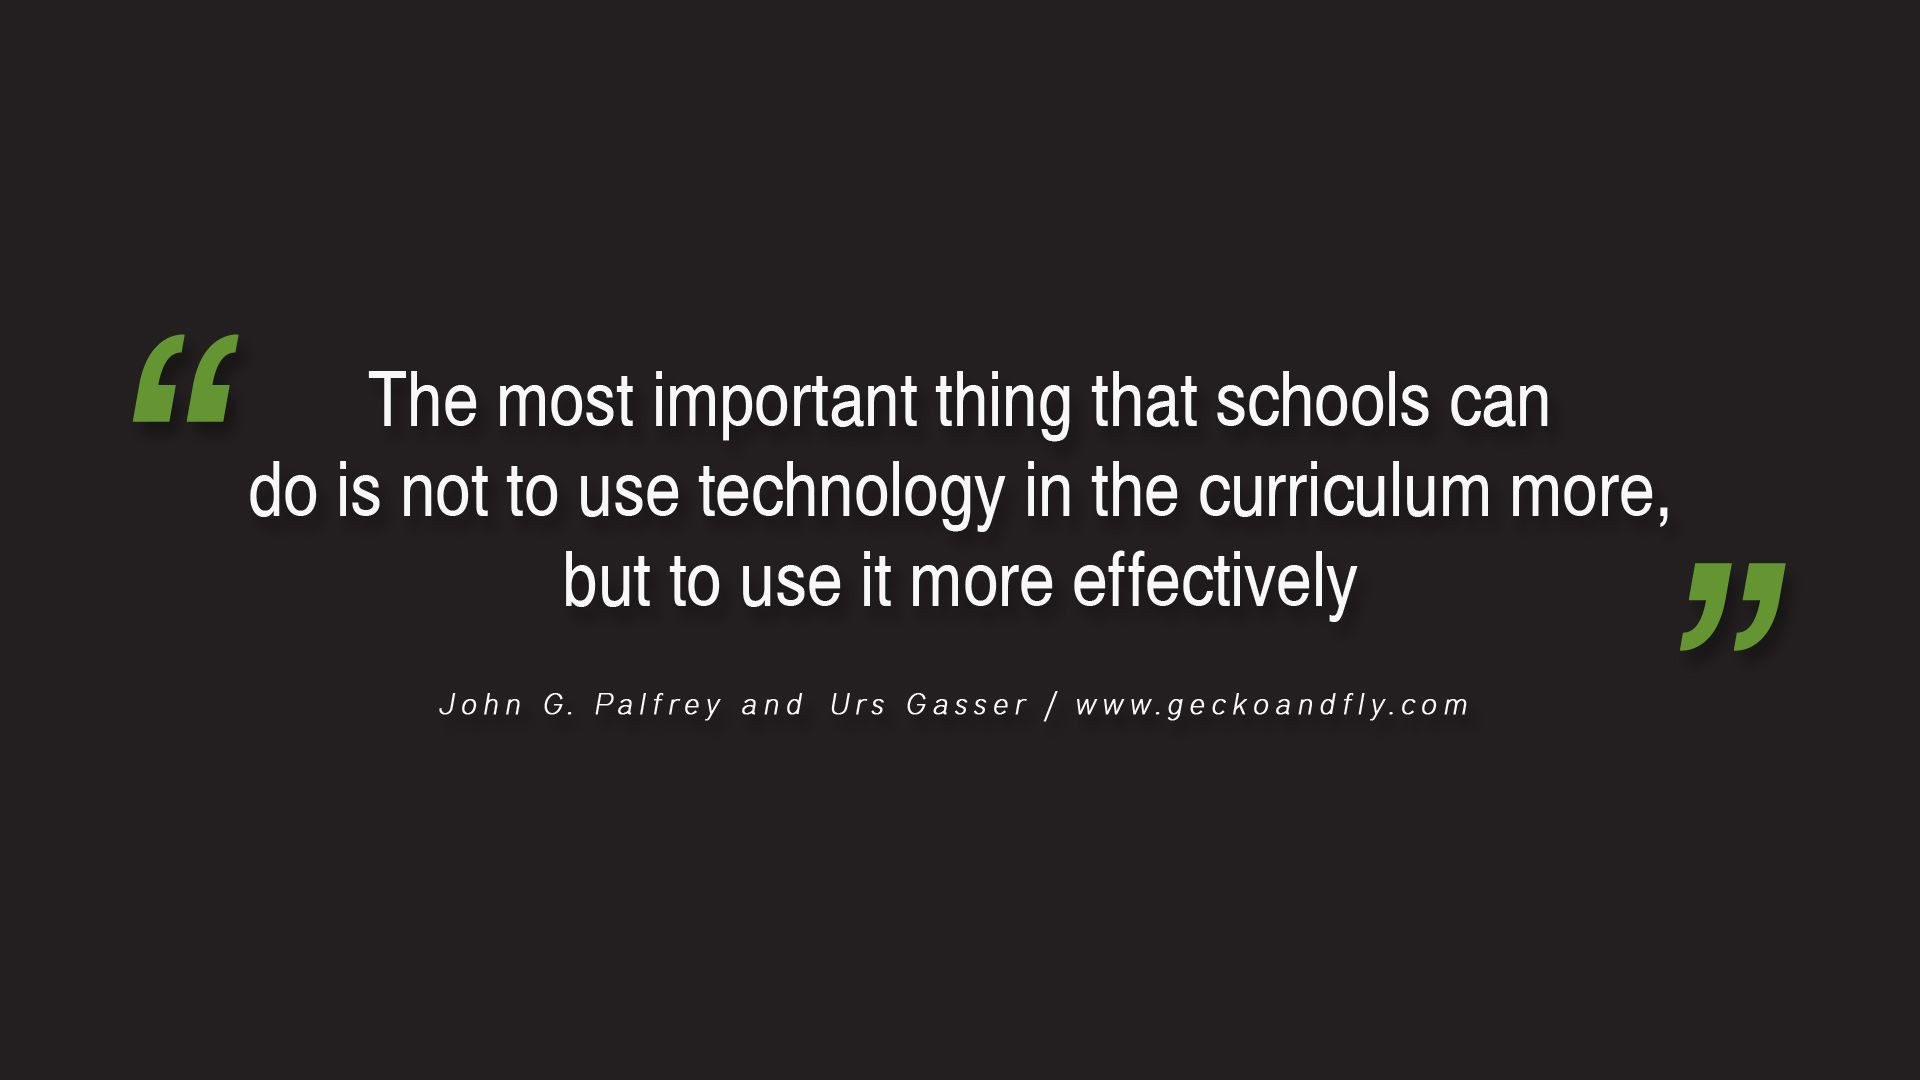 Education Technology Quote
 The most important thing that schools can do is not to use